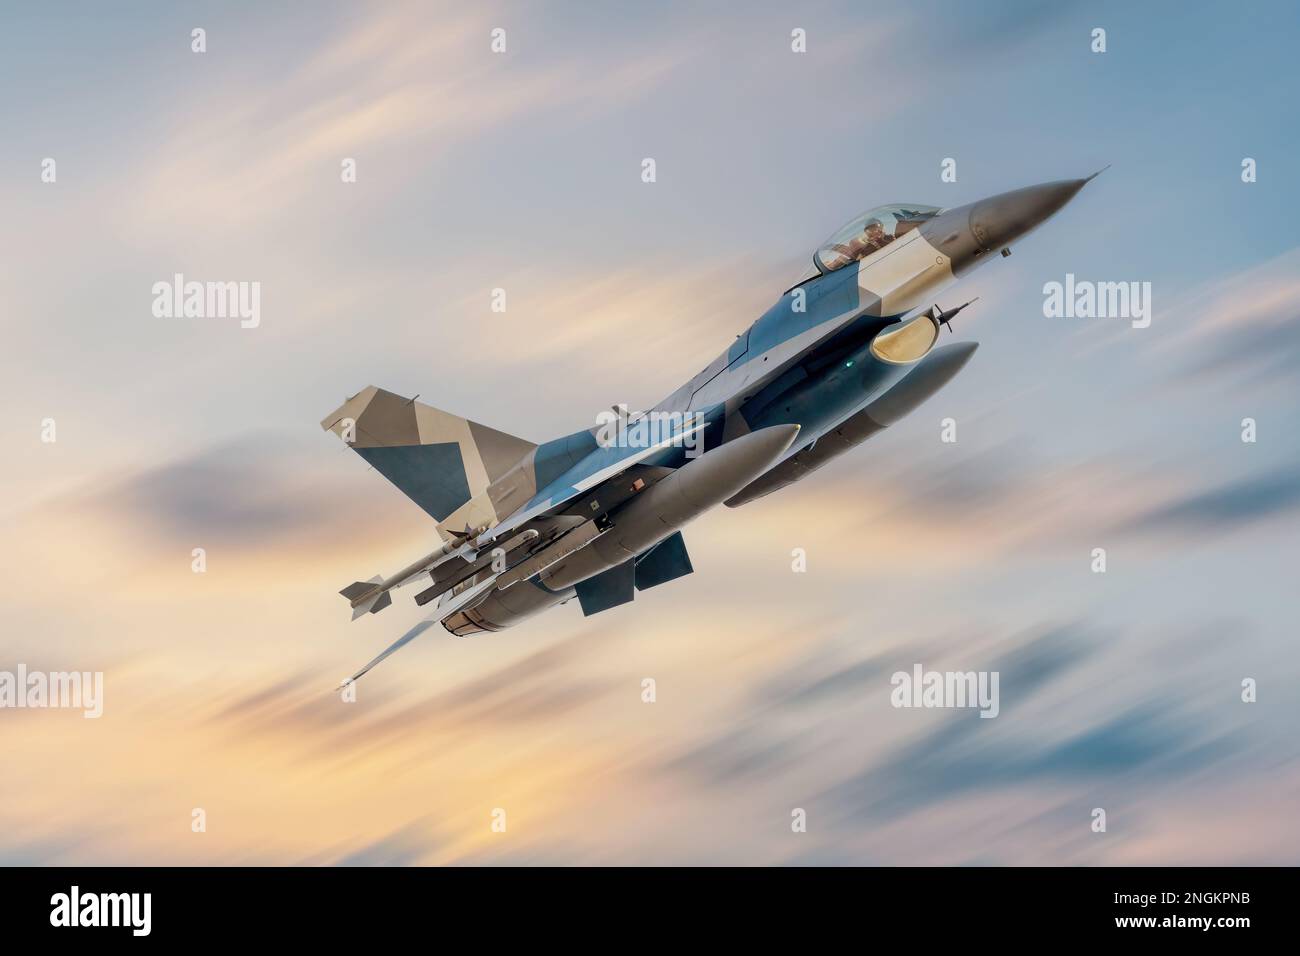 F-16 Falcon Fighter Jet in Flight. High speed Fast Jet military aeroplane on a combat mission. Fighter jets for Ukraine Stock Photo